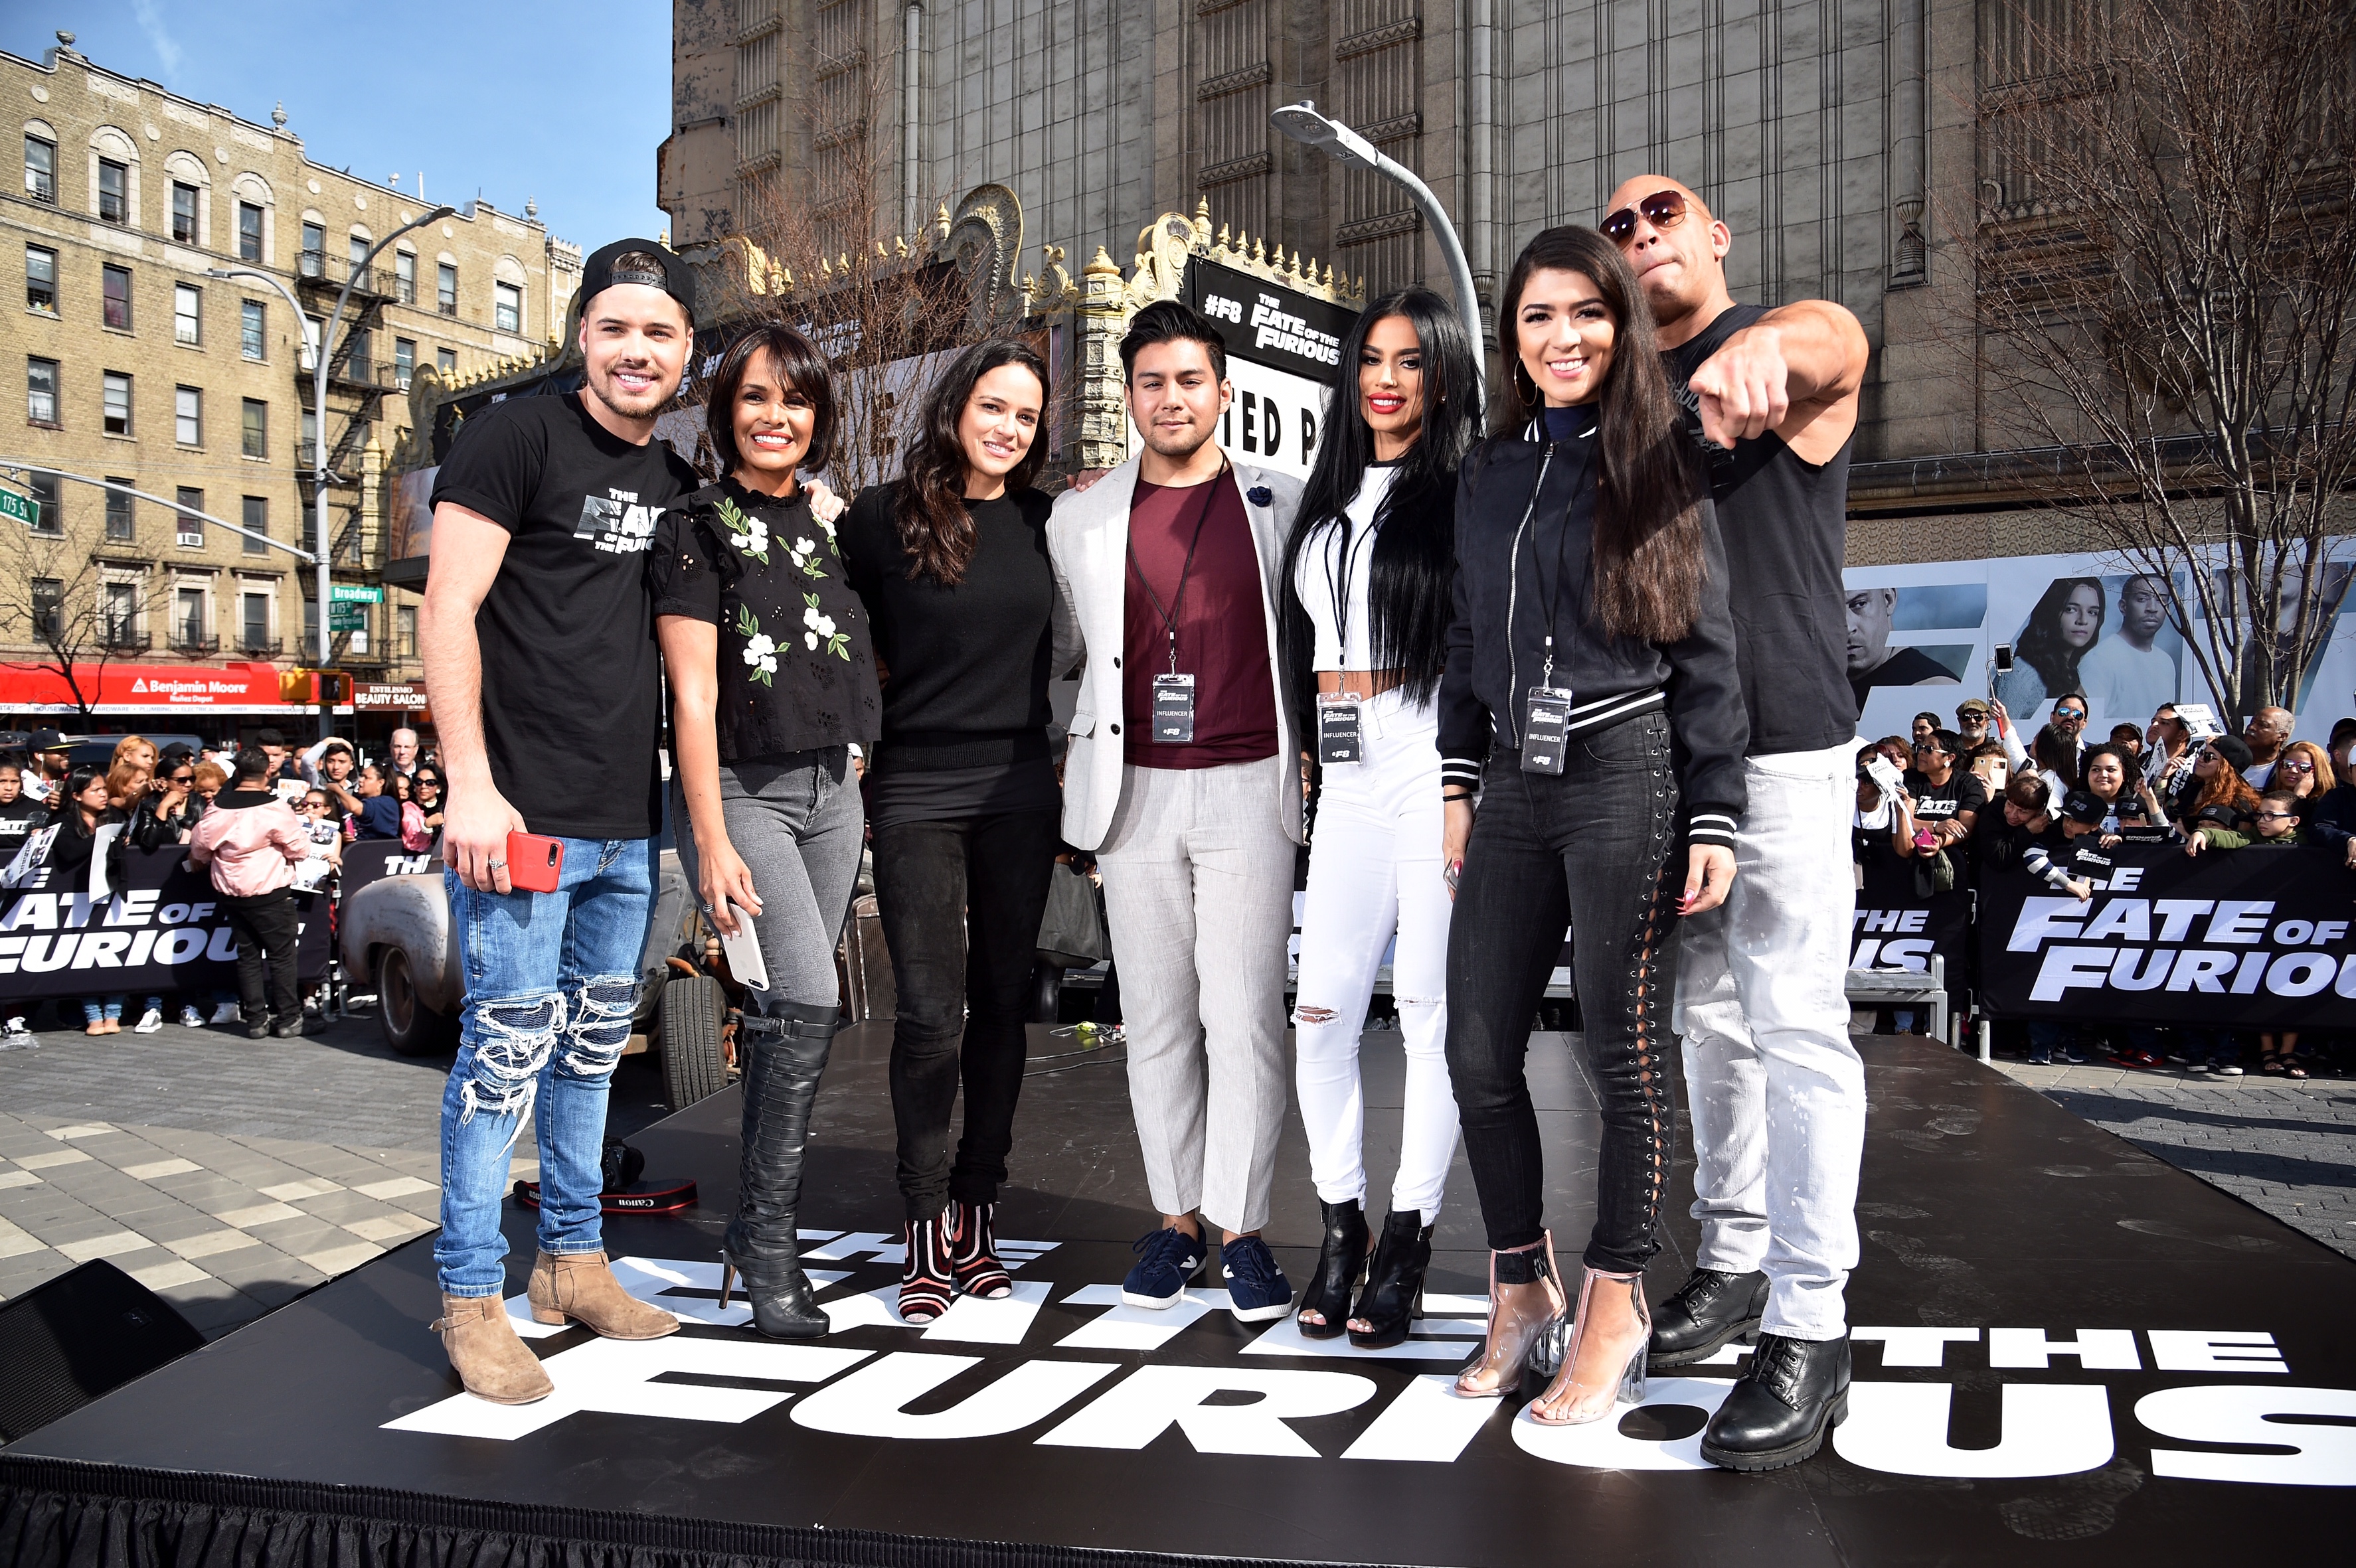 NEW YORK, NY - APRIL 11: William Valdes, Birmania Rios, Carolina Enamorado, and Sherry Maldonado pose with Michelle Rodriguez and Vin Diesel as they visit Washington Heights on behalf of "The Fate Of The Furious" on April 11, 2017 in New York City. (Photo by Kevin Mazur/Getty Images for Universal Pictures)